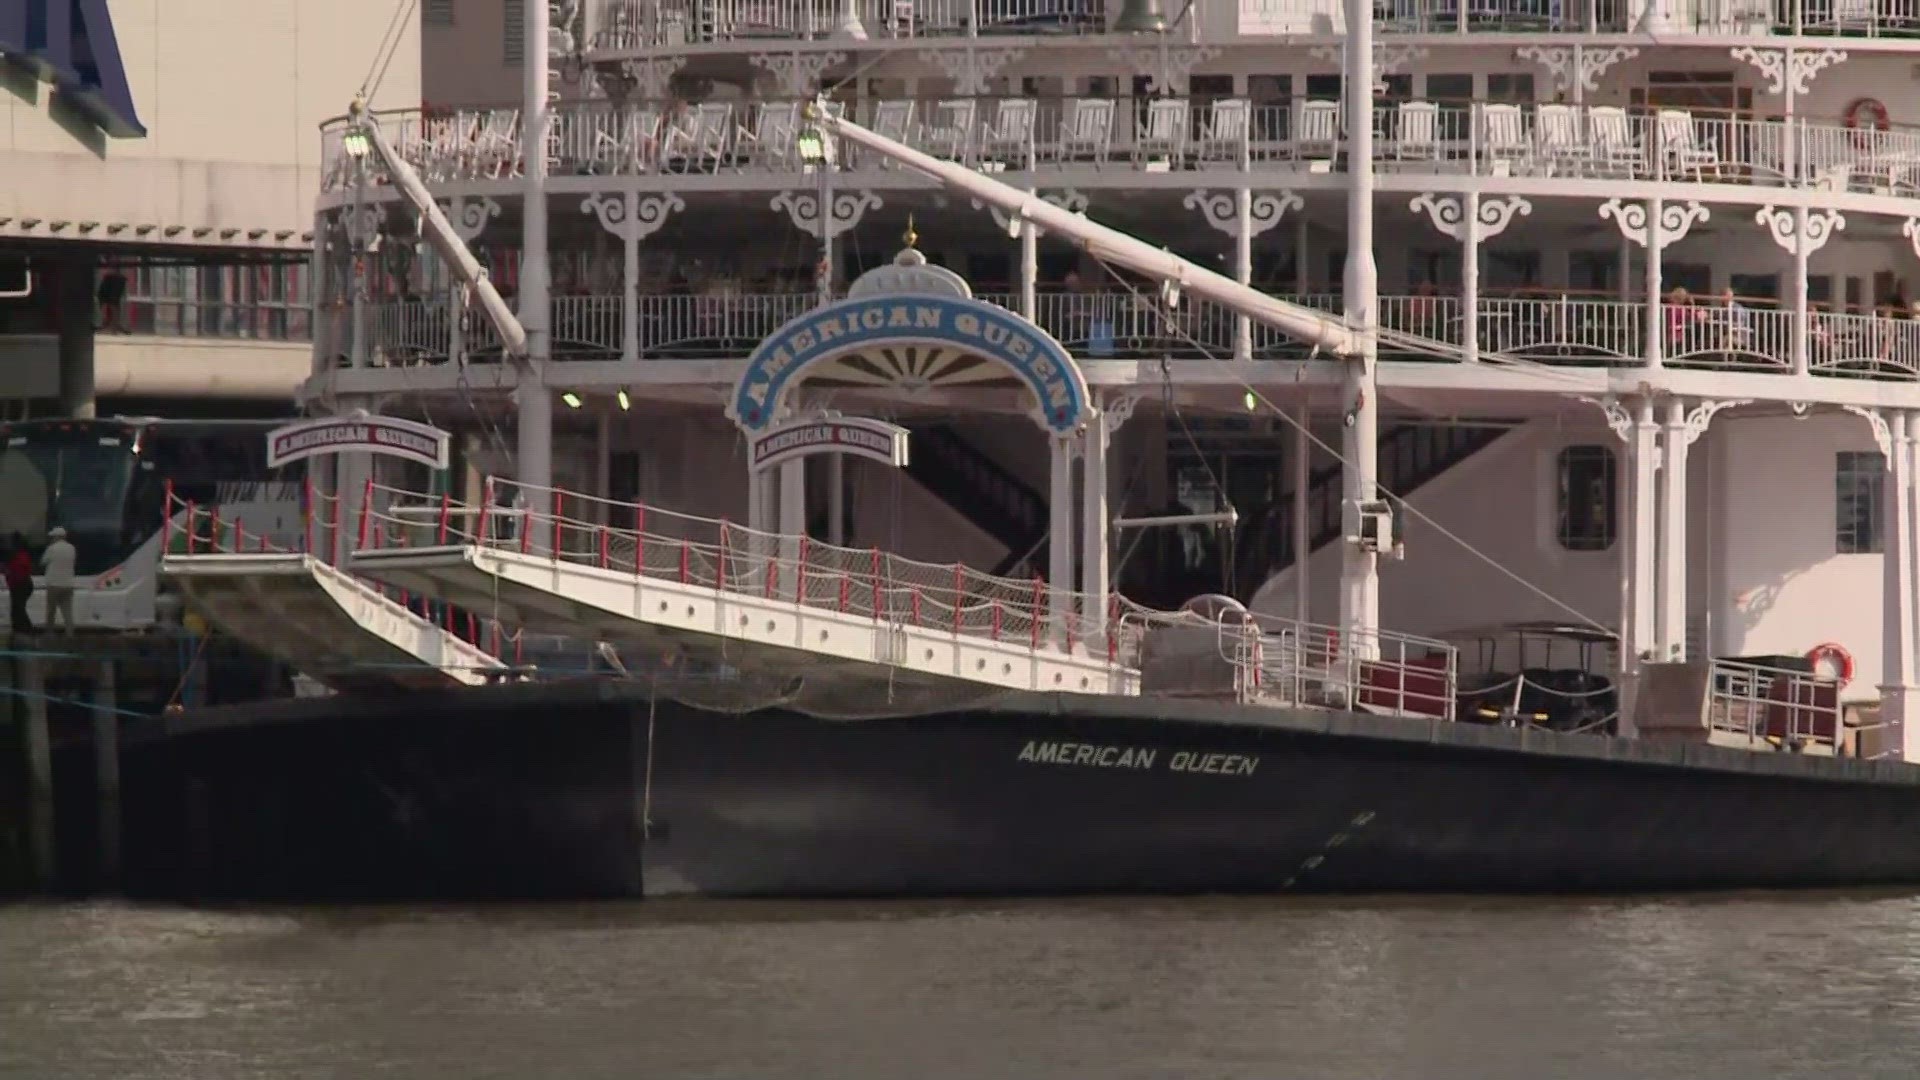 WWL-TV continues coverage of National Maritime Day in New Orleans.